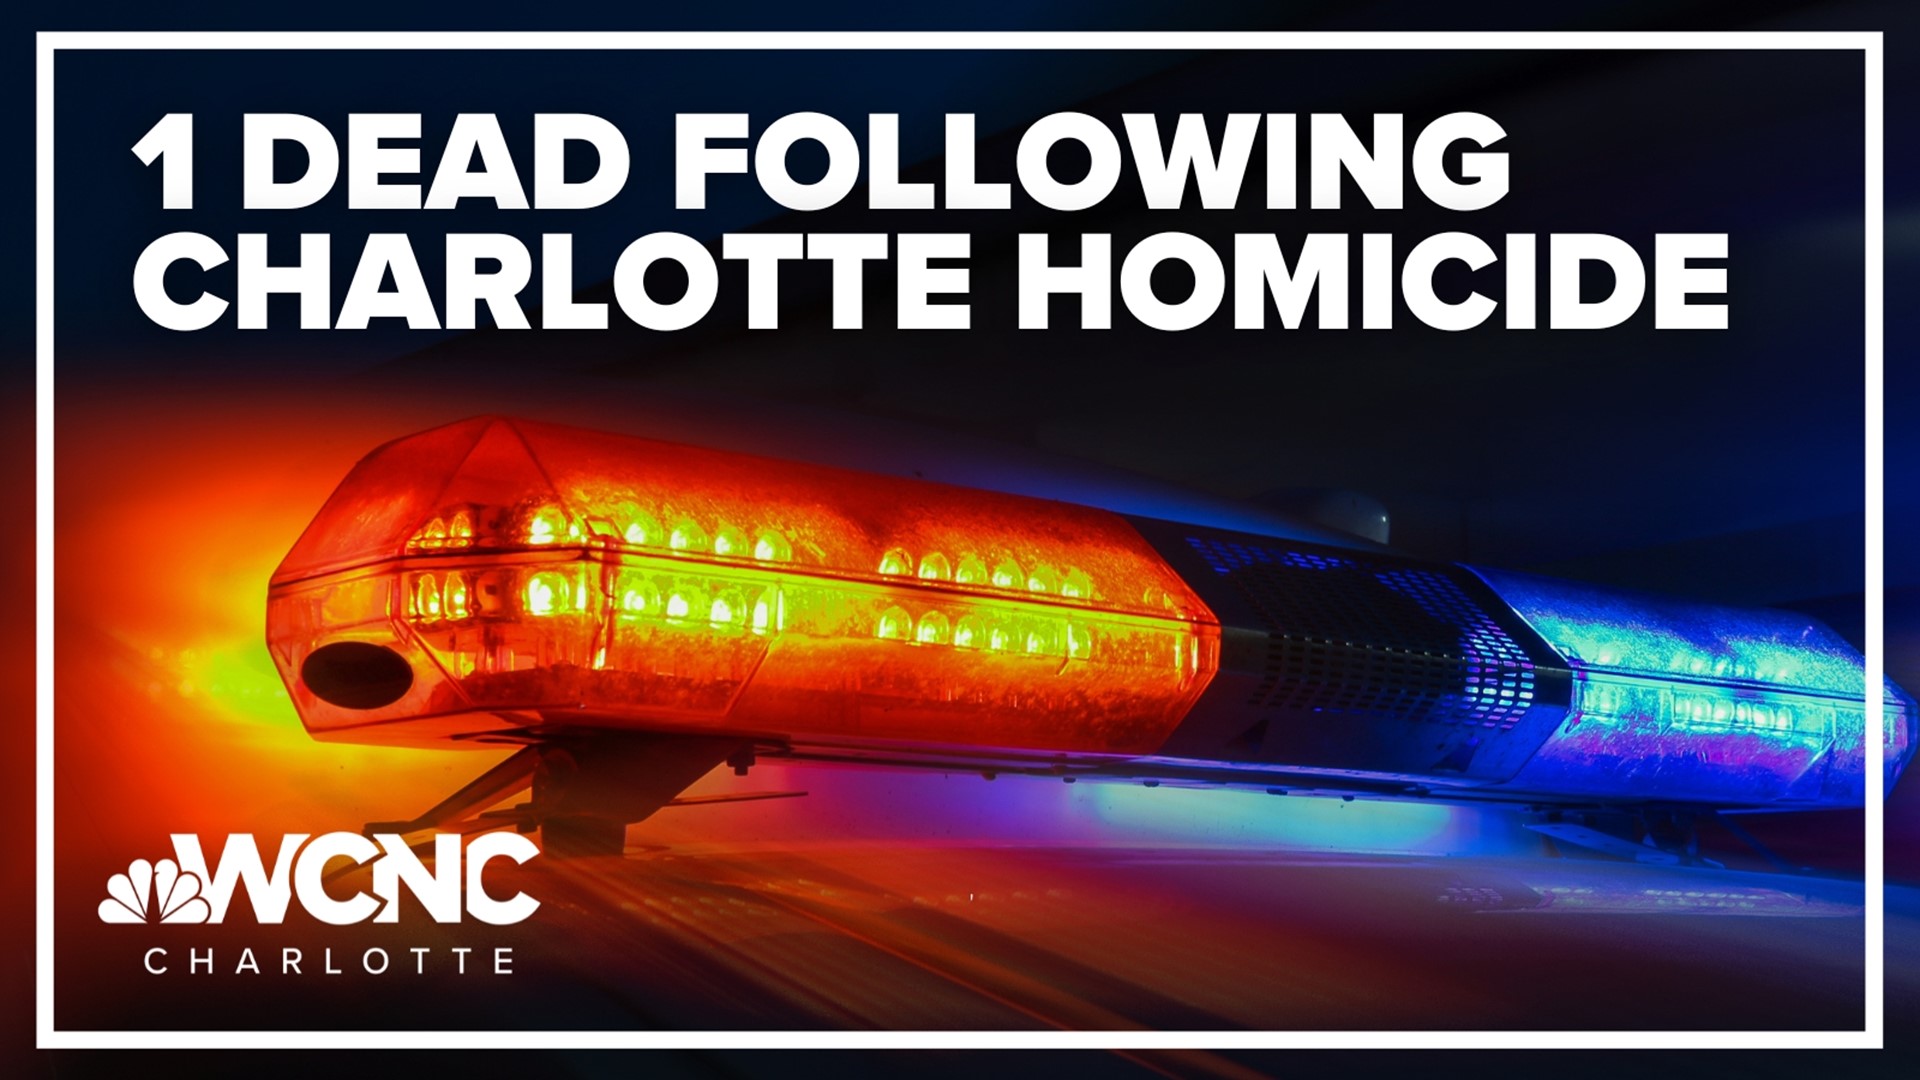 According to police, the crime happened on Willard Street in northwest Charlotte.